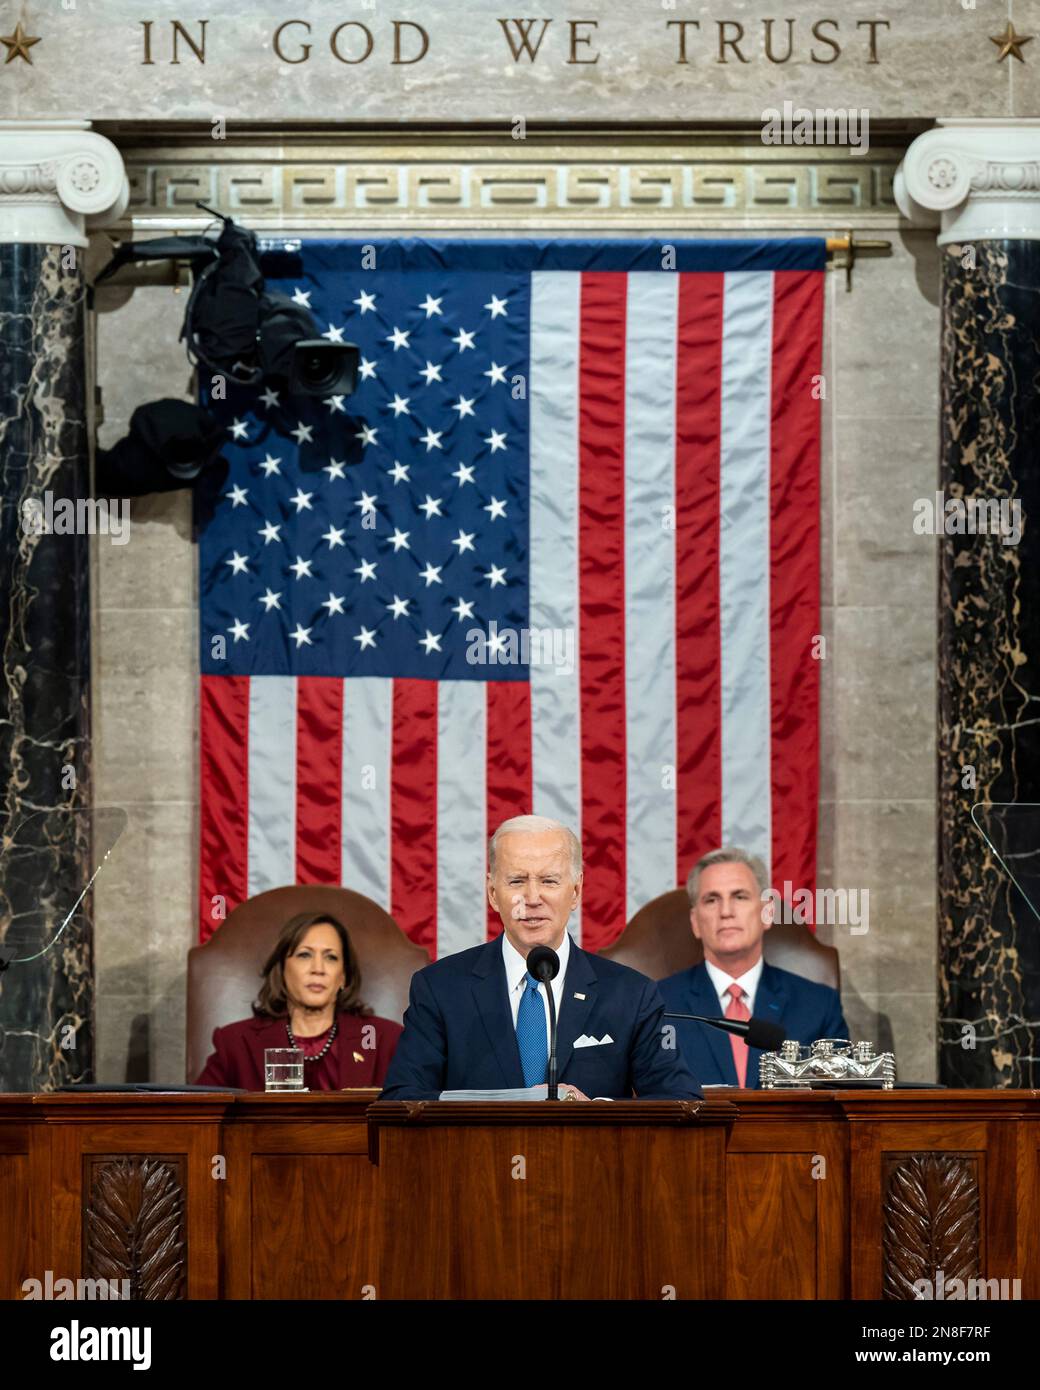 Washington, United States Of America. 07th Feb, 2023. Washington, United States of America. 07 February, 2023. U.S President Joe Biden delivers his State of the Union address to the joint session of Congress, February 7, 2023 in Washington, DC Vice President Kamala Harris, left, and Speaker Kevin McCarthy, right, sit behind. Credit: Adam Schultz/White House Photo/Alamy Live News Stock Photo